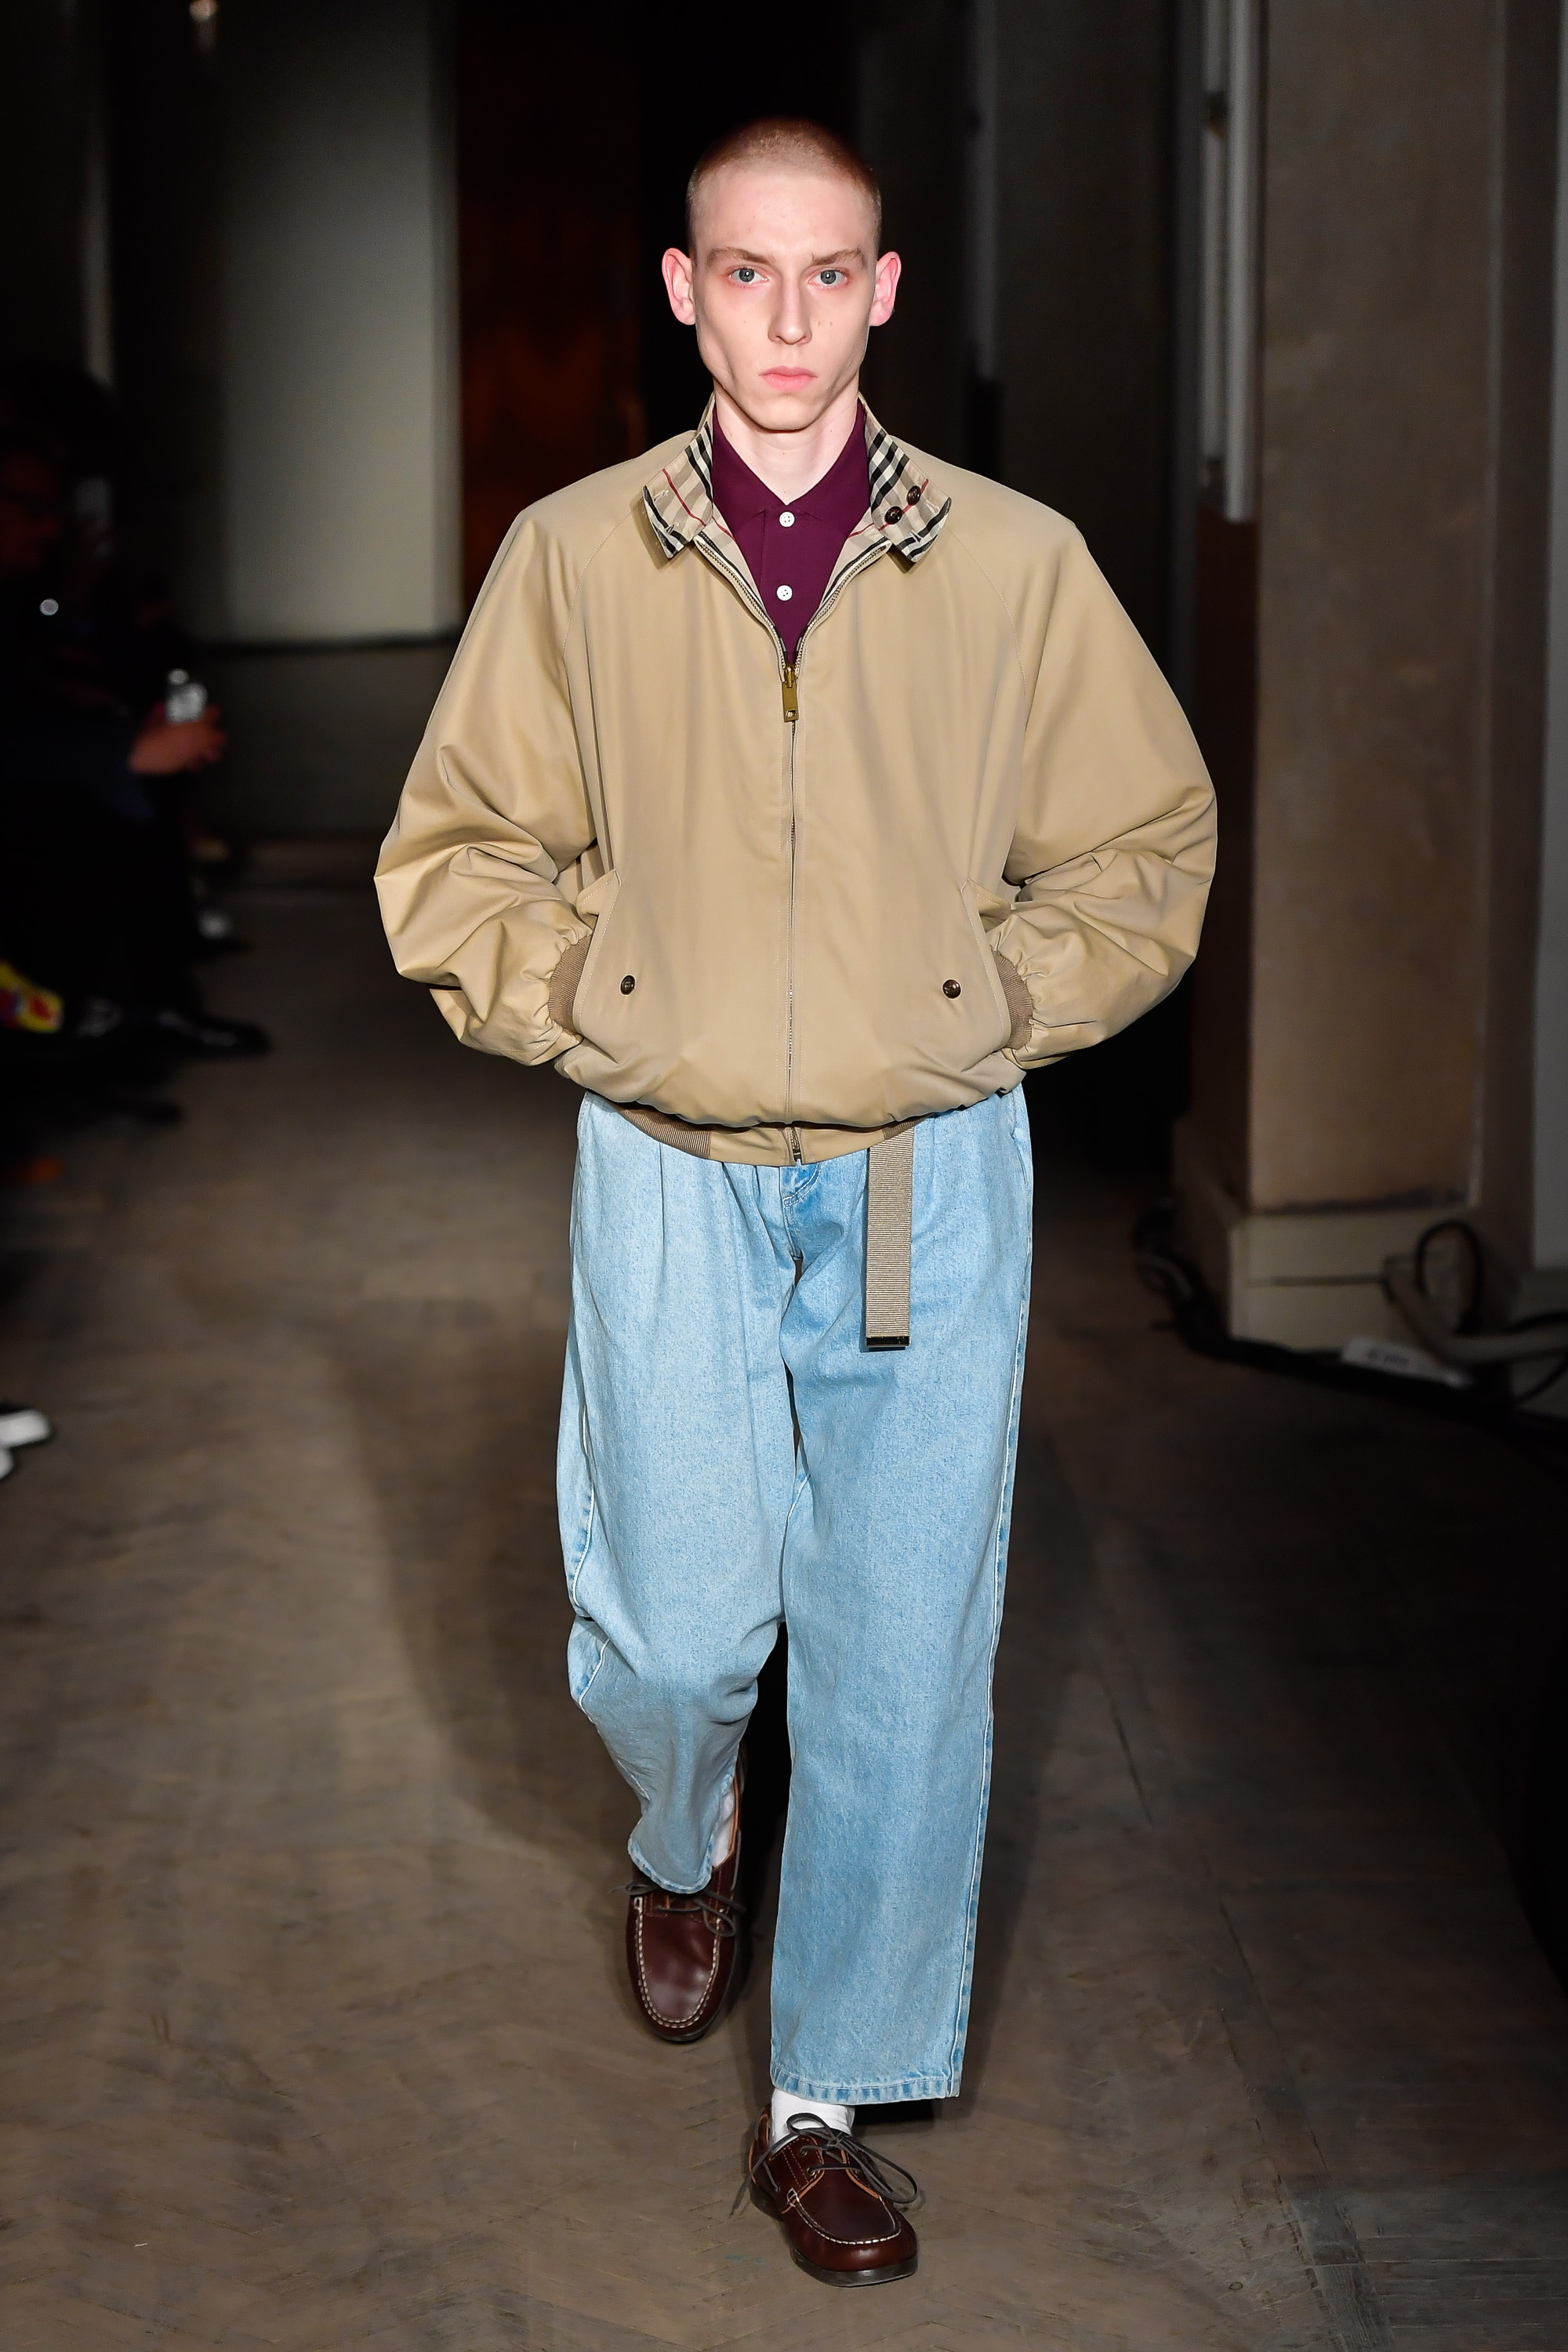 GOSHA X BURBERRY CAPSULE COLLECTION LAUNCH | WHAT WE ADORE